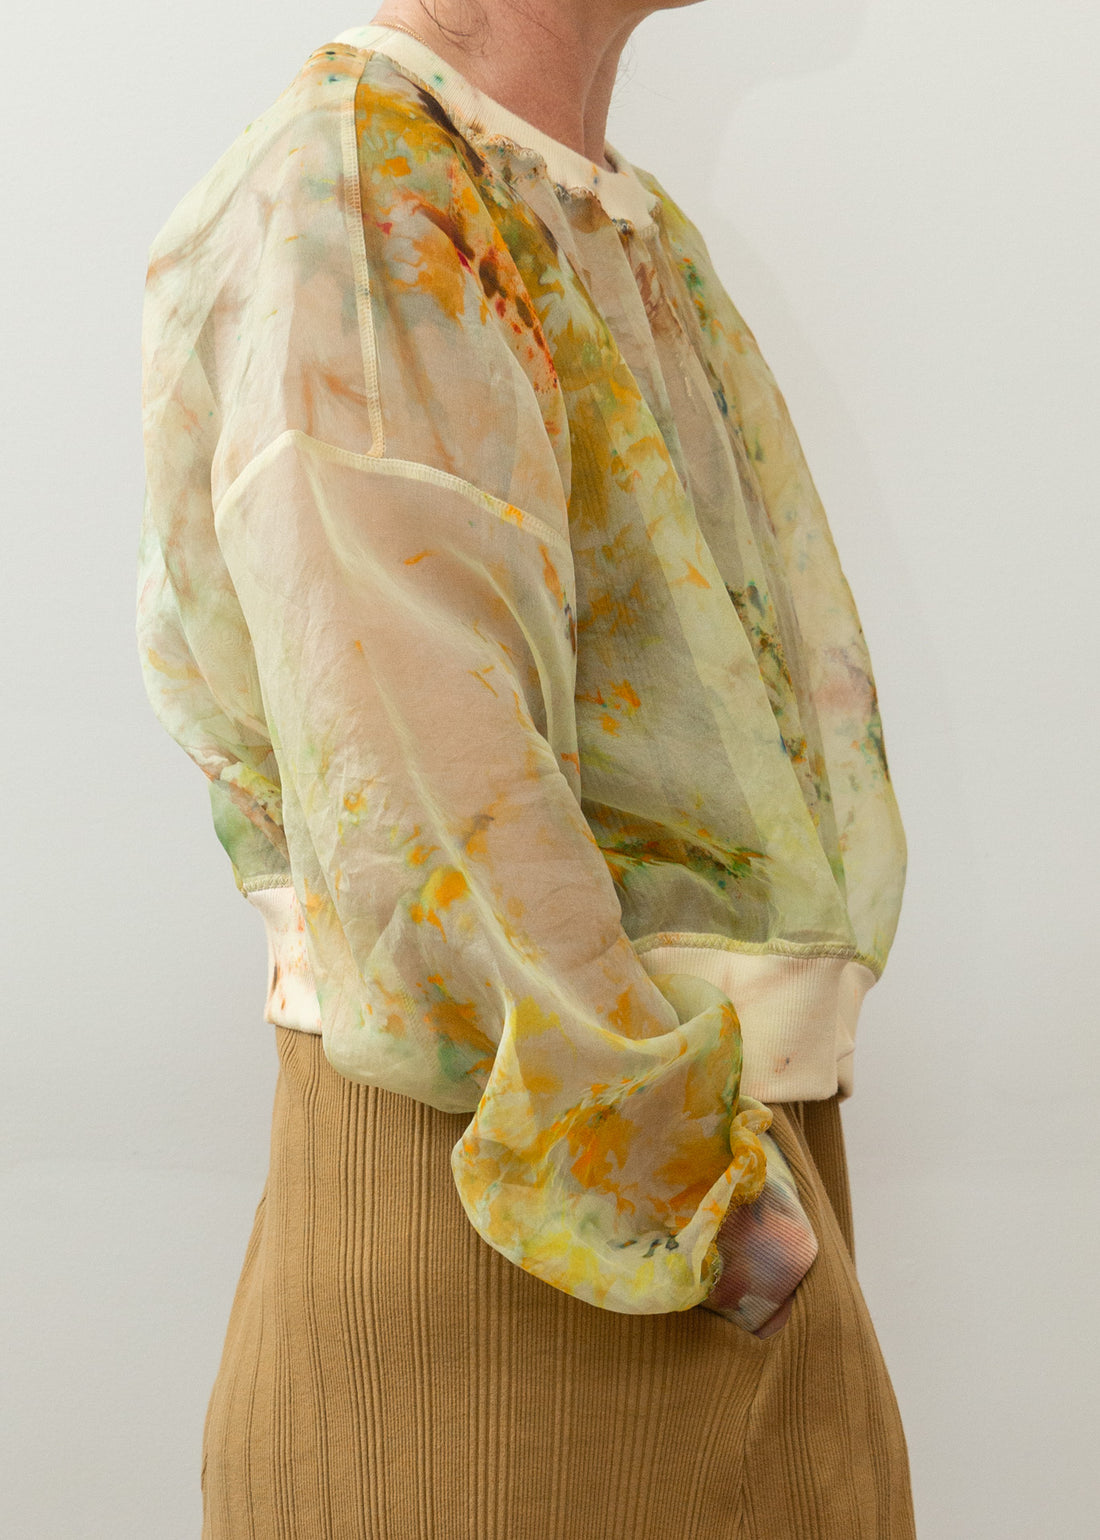 The side of a model wearing a see-through silk top with notes of yellow, green and orange in a tie-dye type style.